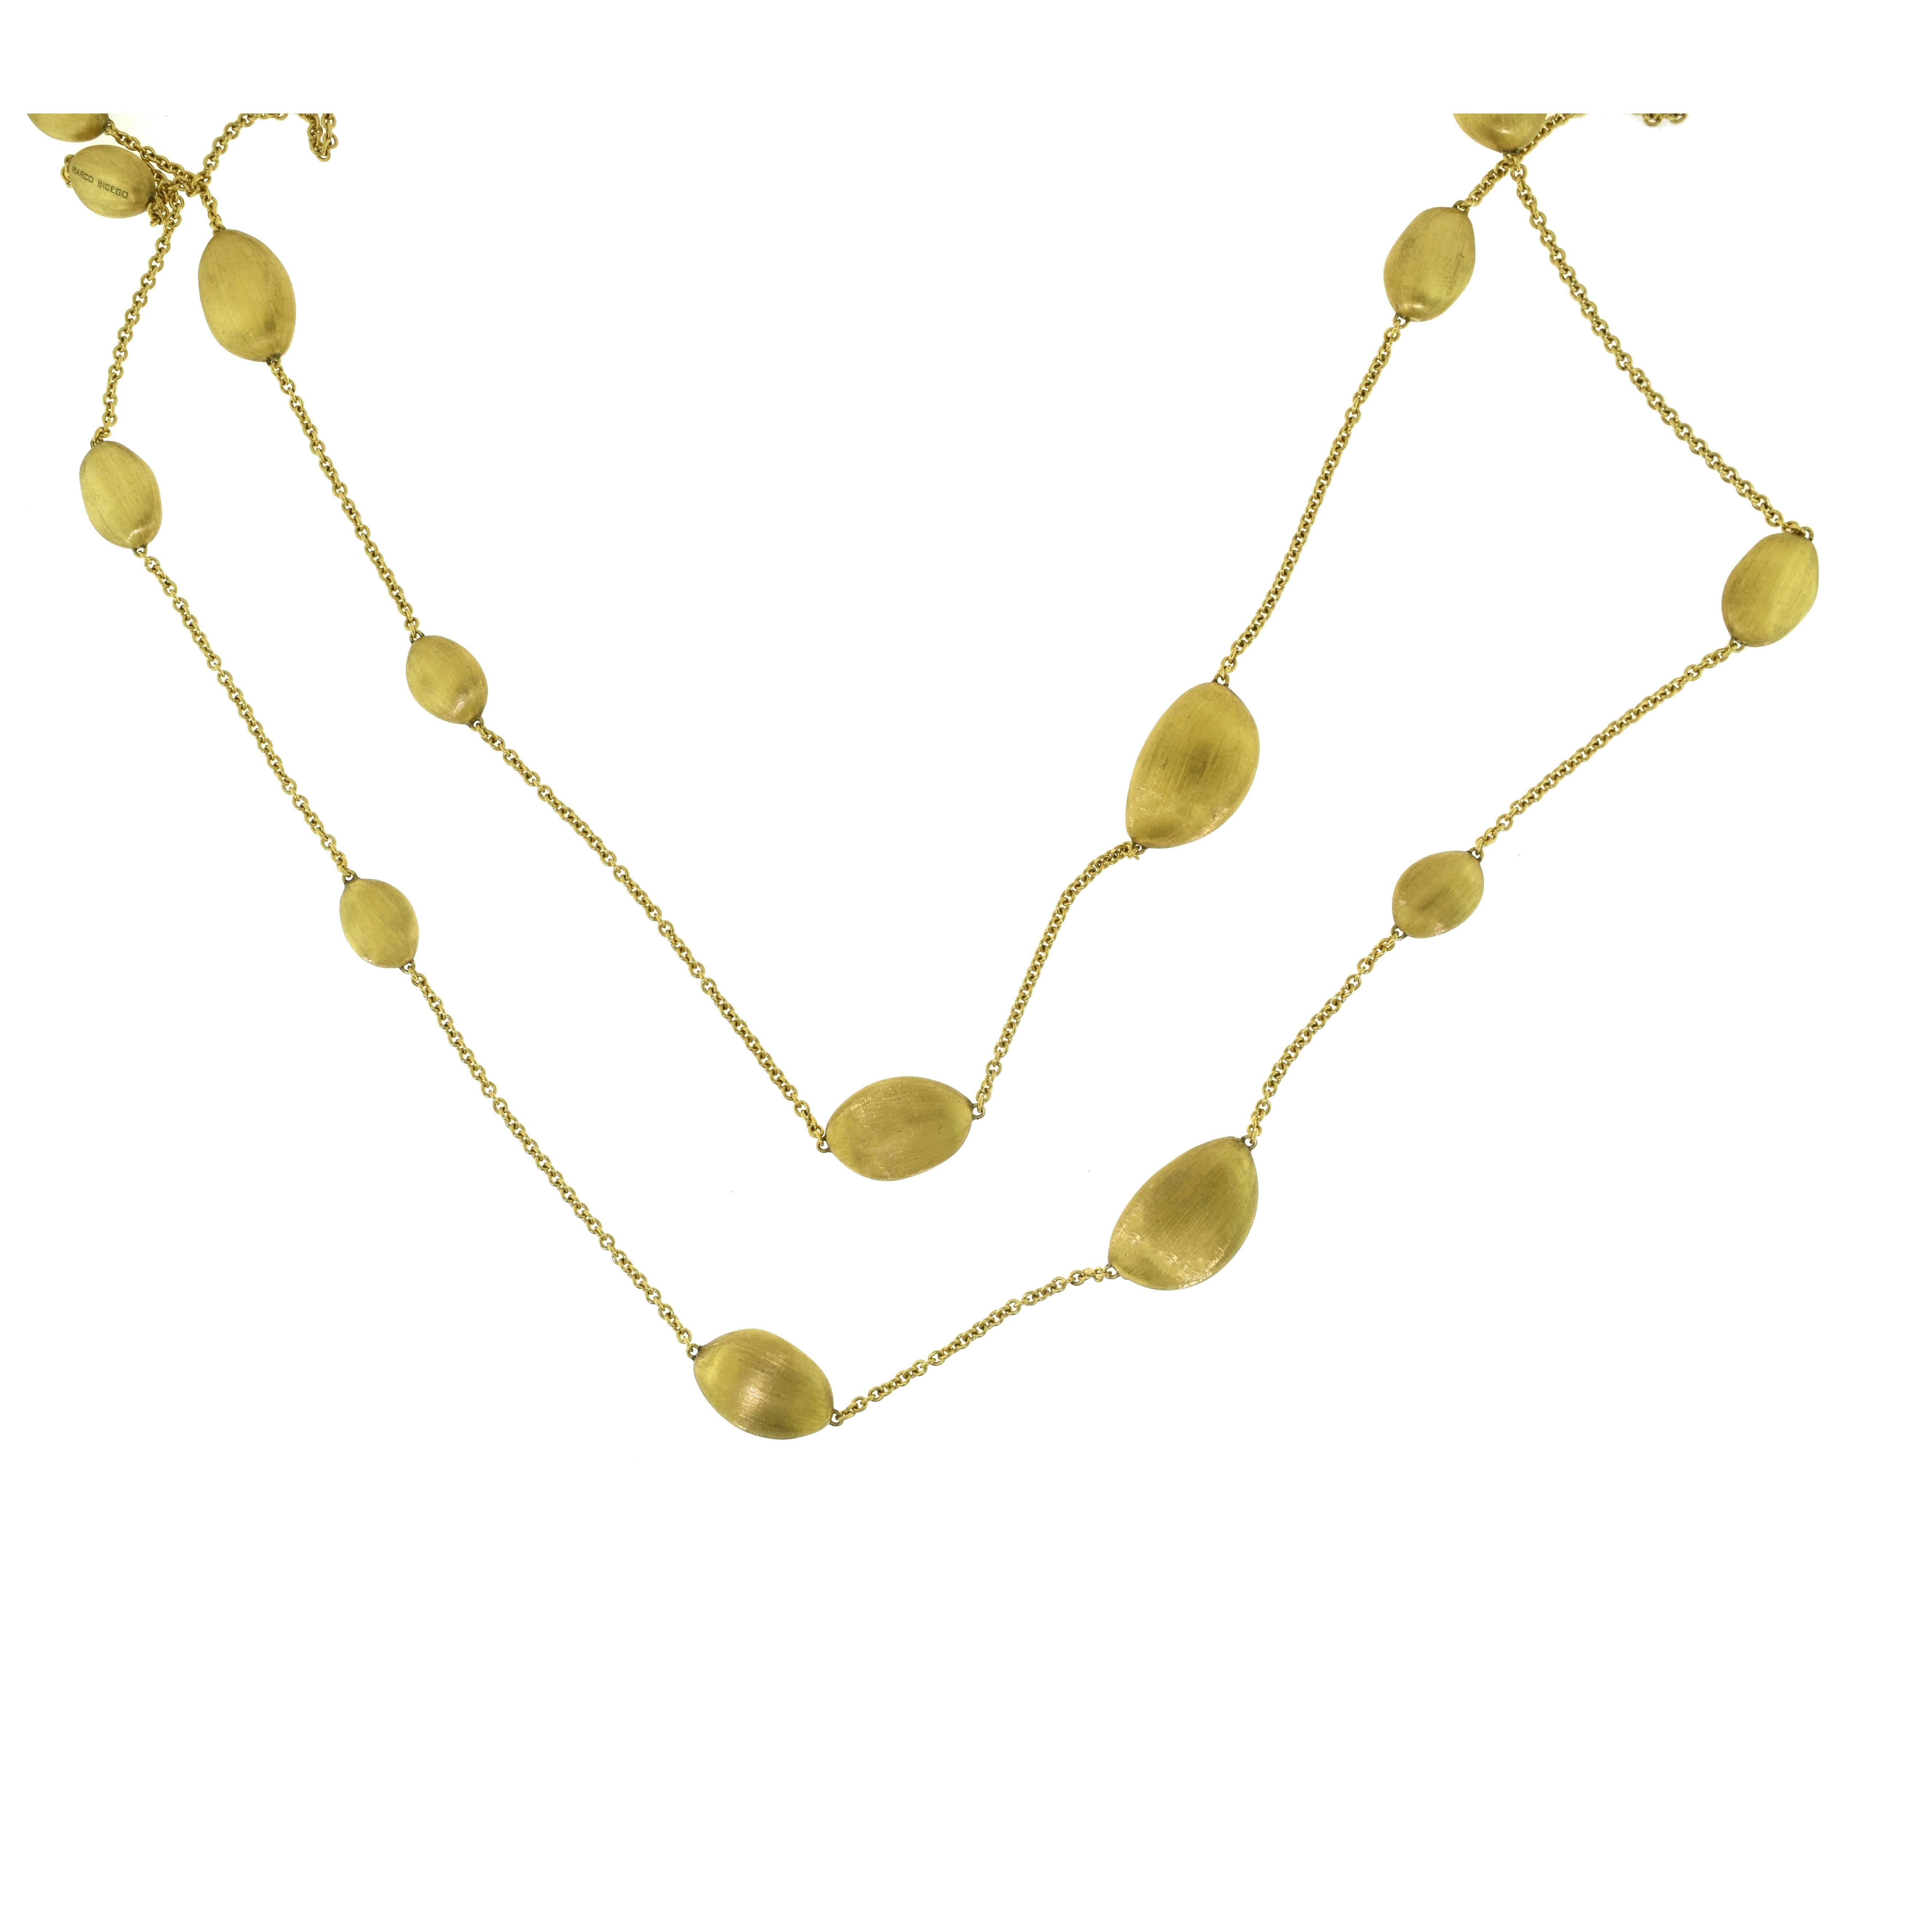 Designer:  Marco Bicego
Collection: Confetti Oro
Style: 14 'bean' necklace
Metal: Yellow Gold
Metal Purity: 18k
Total Item Weight (g): 46.0
Necklace Length: 46 inches
Largest Bean Dimensions: 14.86 x 24.56 x 9.28 mm
Smallest Bean Dimensions: 10.09 x